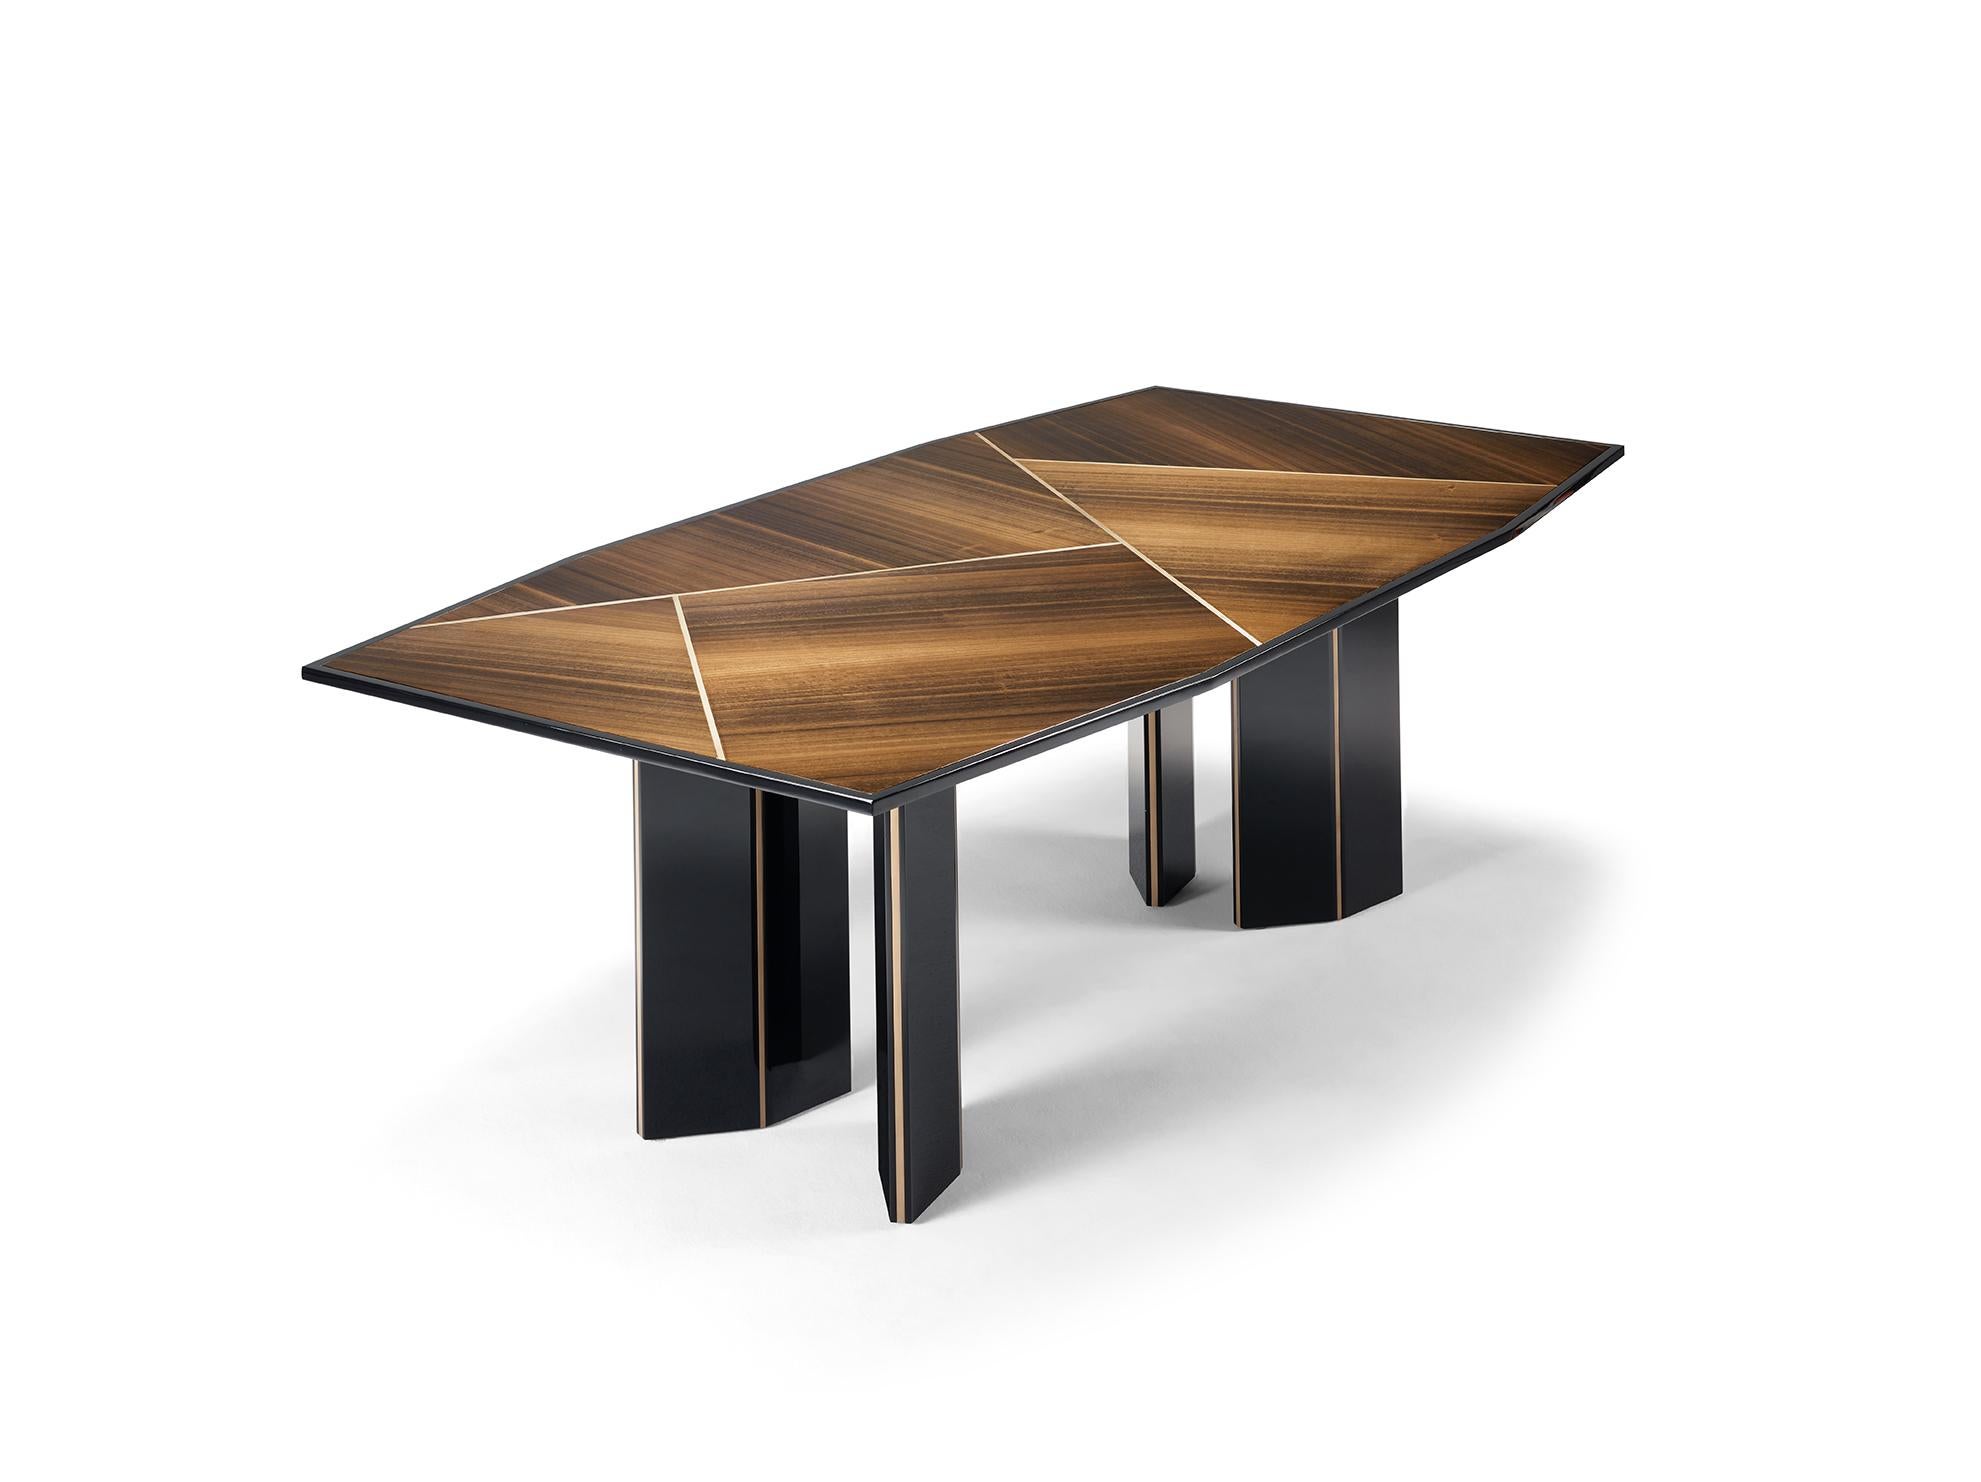 The LORCA Dining Table is a game of shapes between the legs and the top, not obeying the straight lines. The refined inlaid detail confines the division to the table top, allowing customization and creativity with our range of lacquer colors and